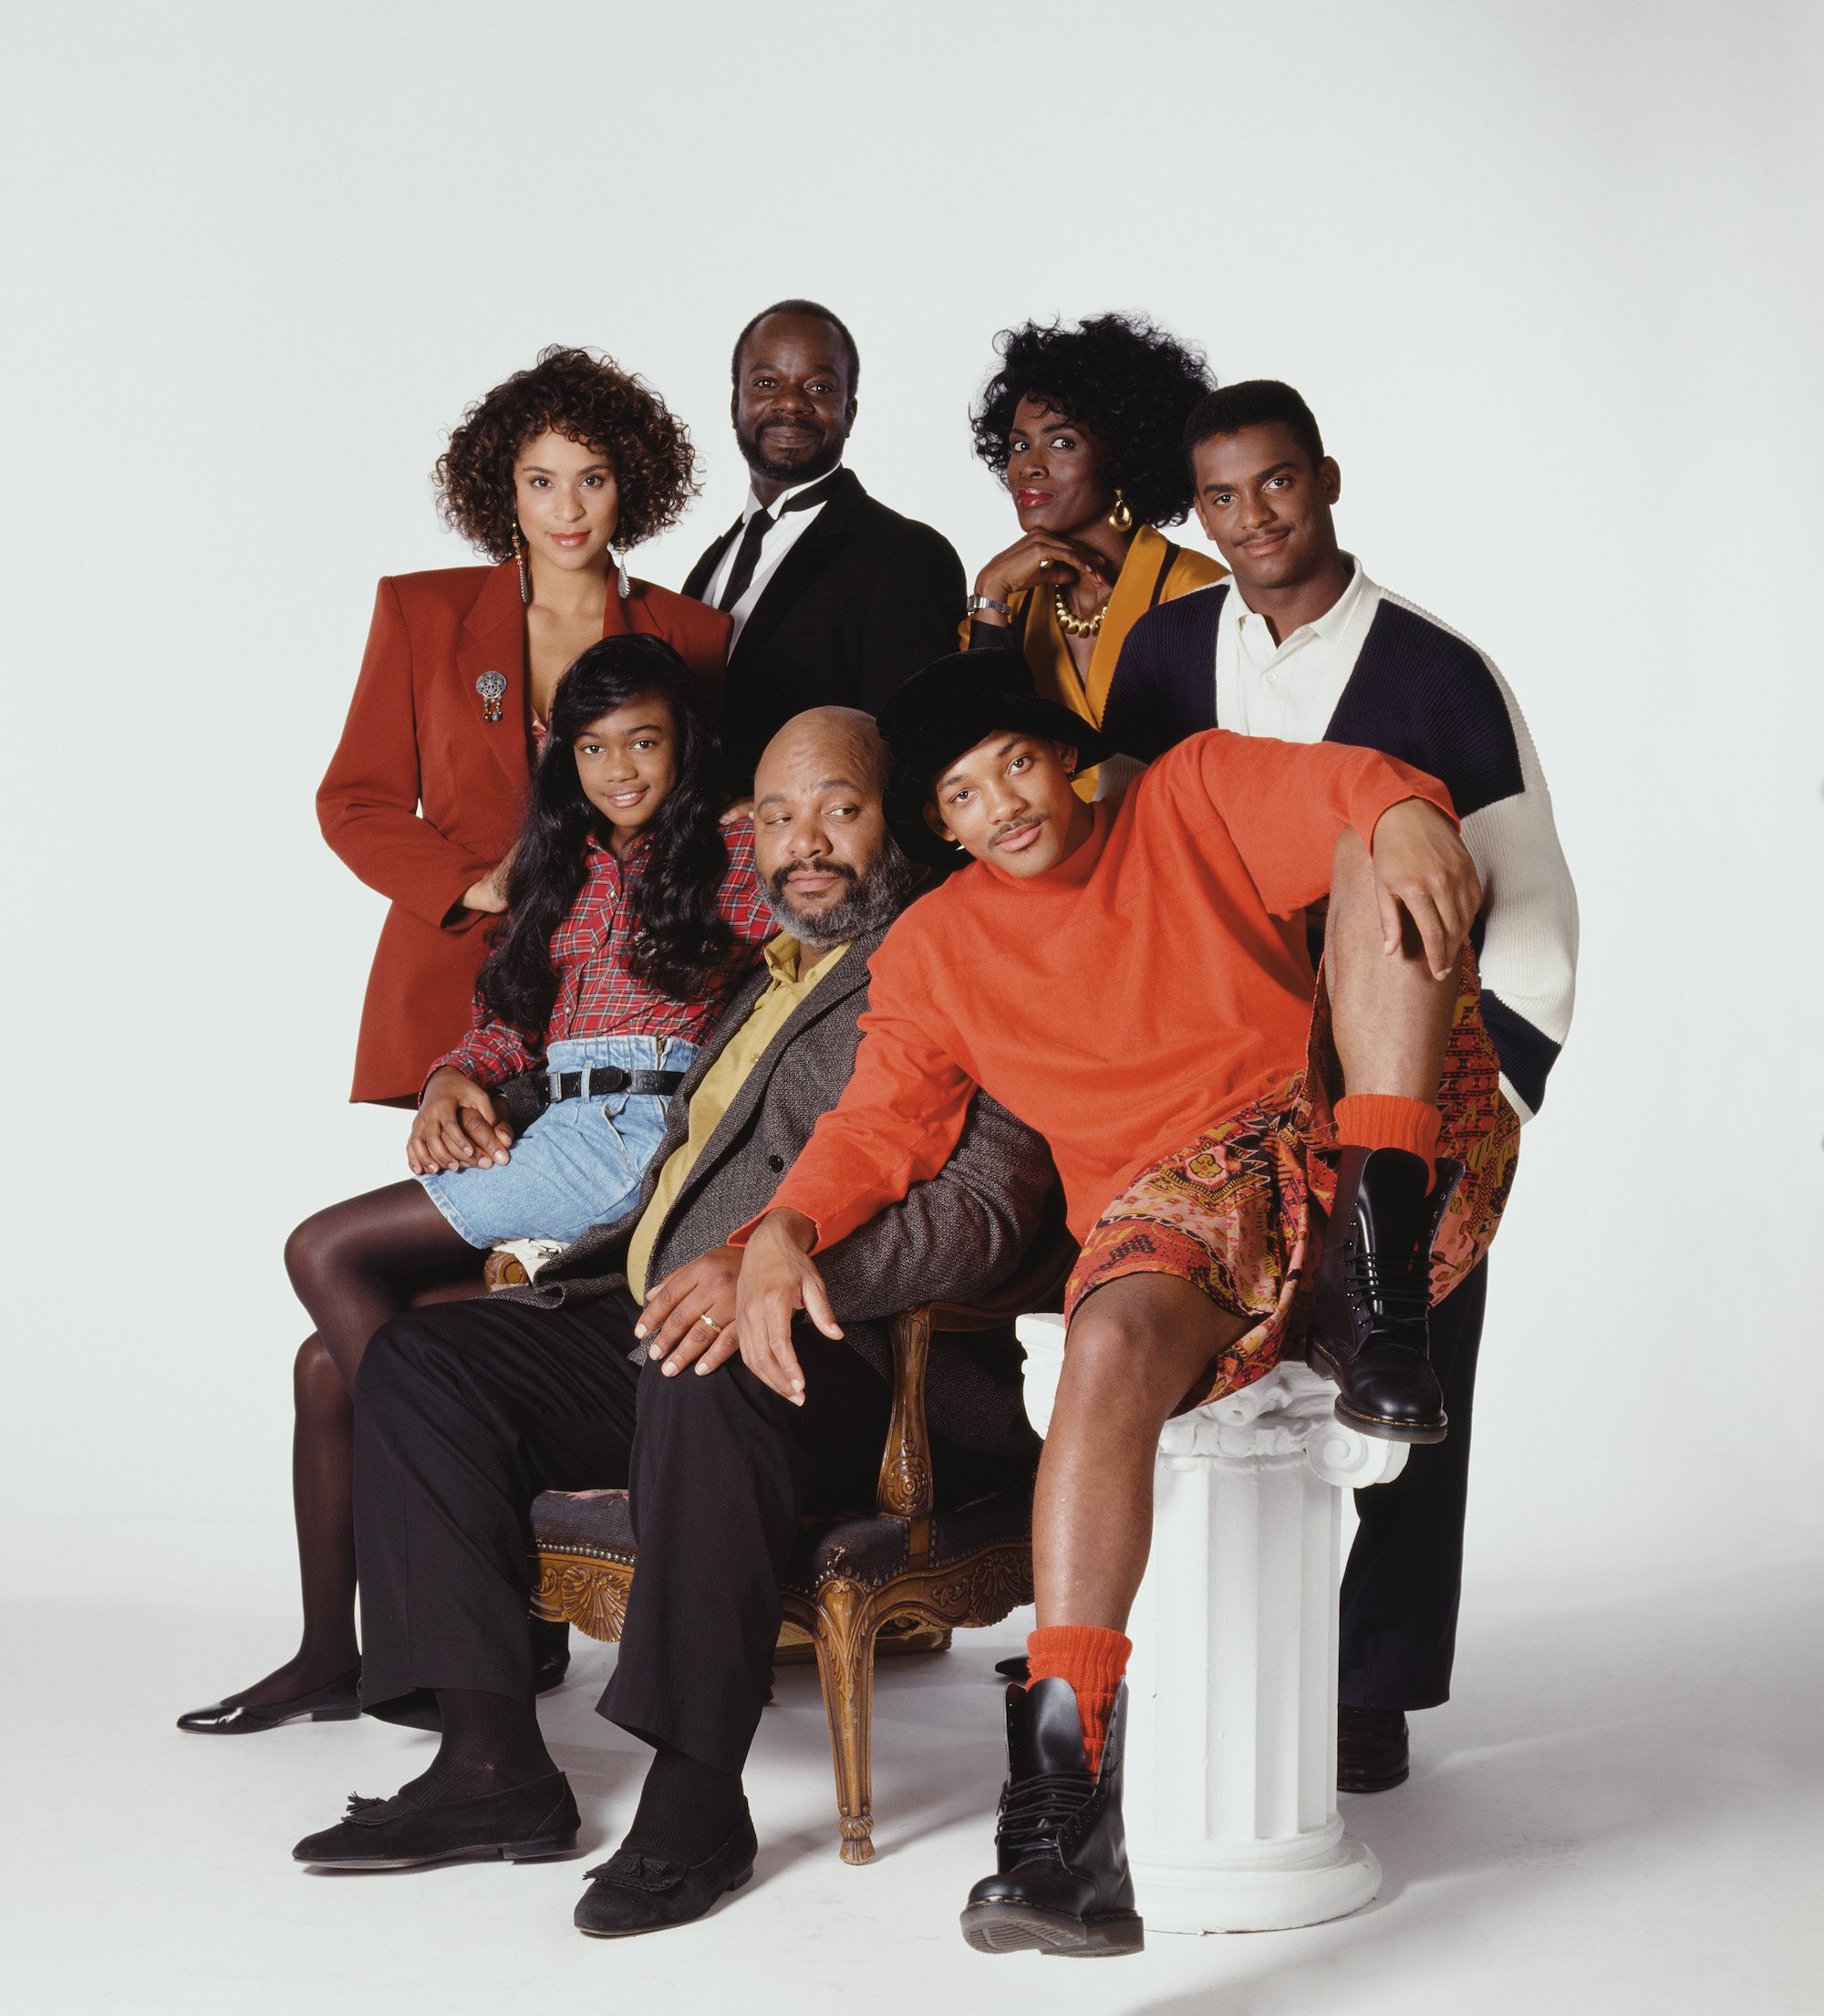 Karyn Parsons, Joseph Marcell, Janet Hubert, Alfonso Ribeiro, Tatyana Ali, James Avery, and Will Smith posing for a photoshoot in ‘Fresh Prince of Bel-Air’ Season 2